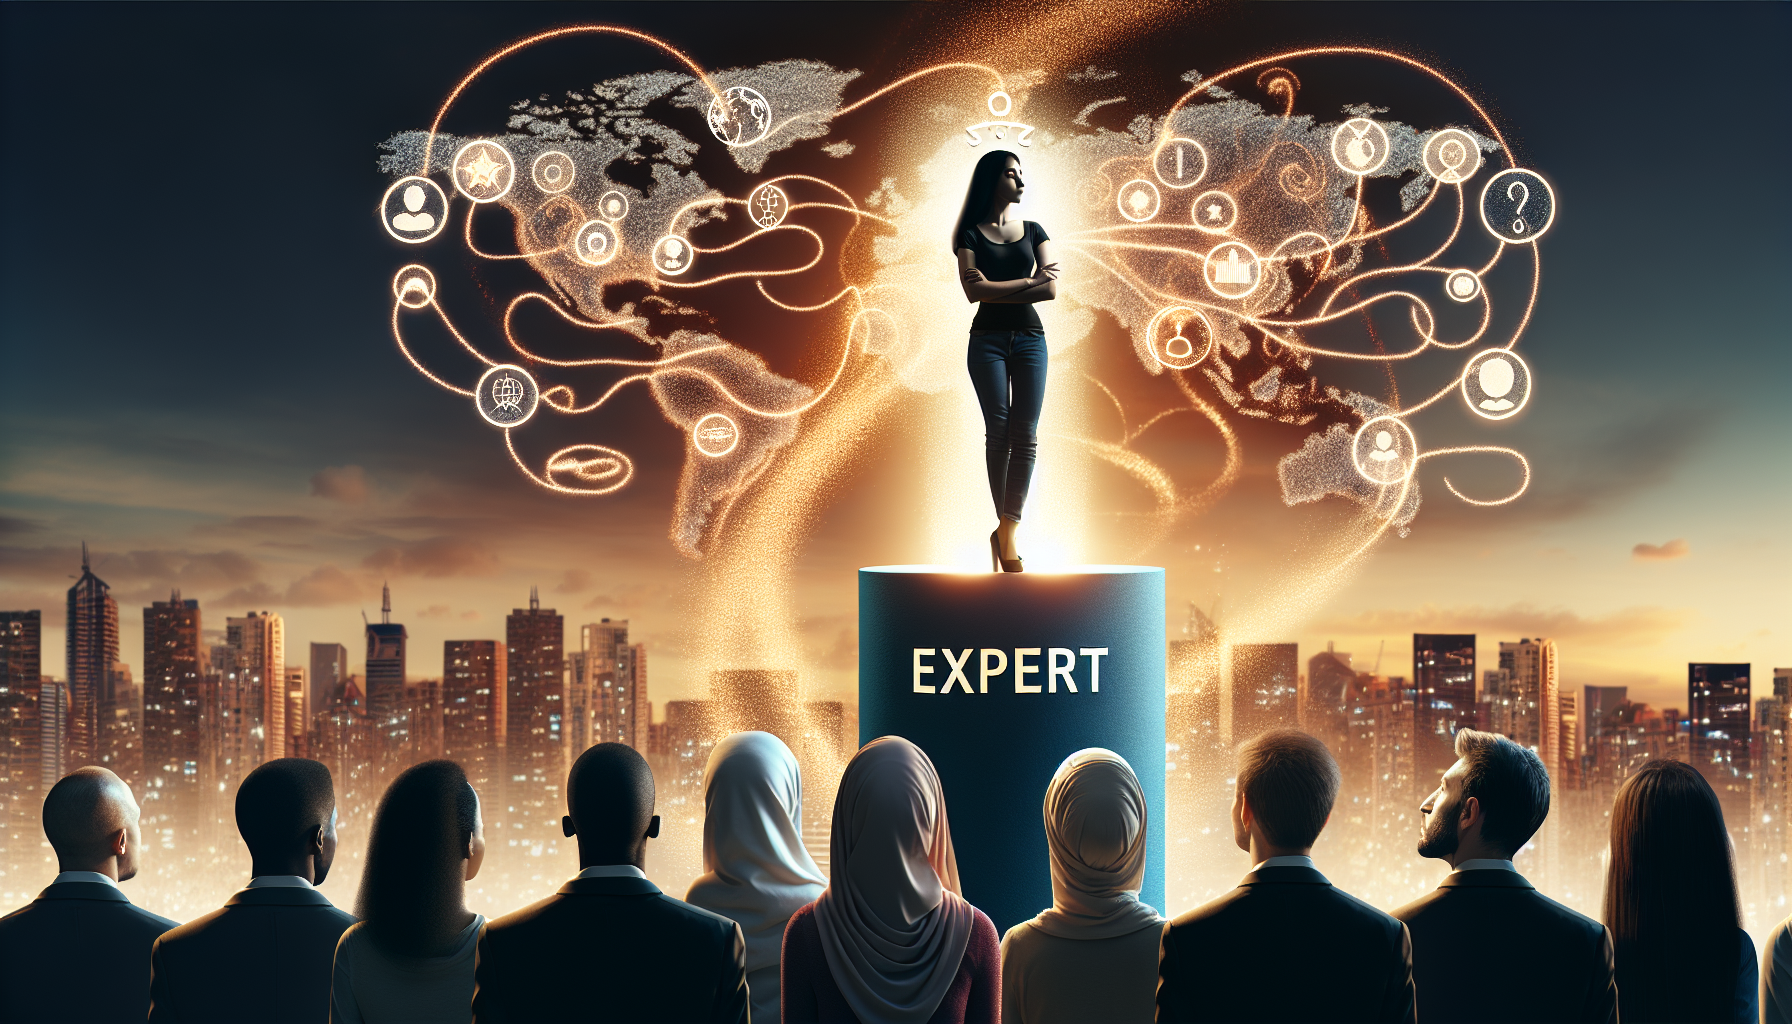 Illustration depicting the expertise myth in business